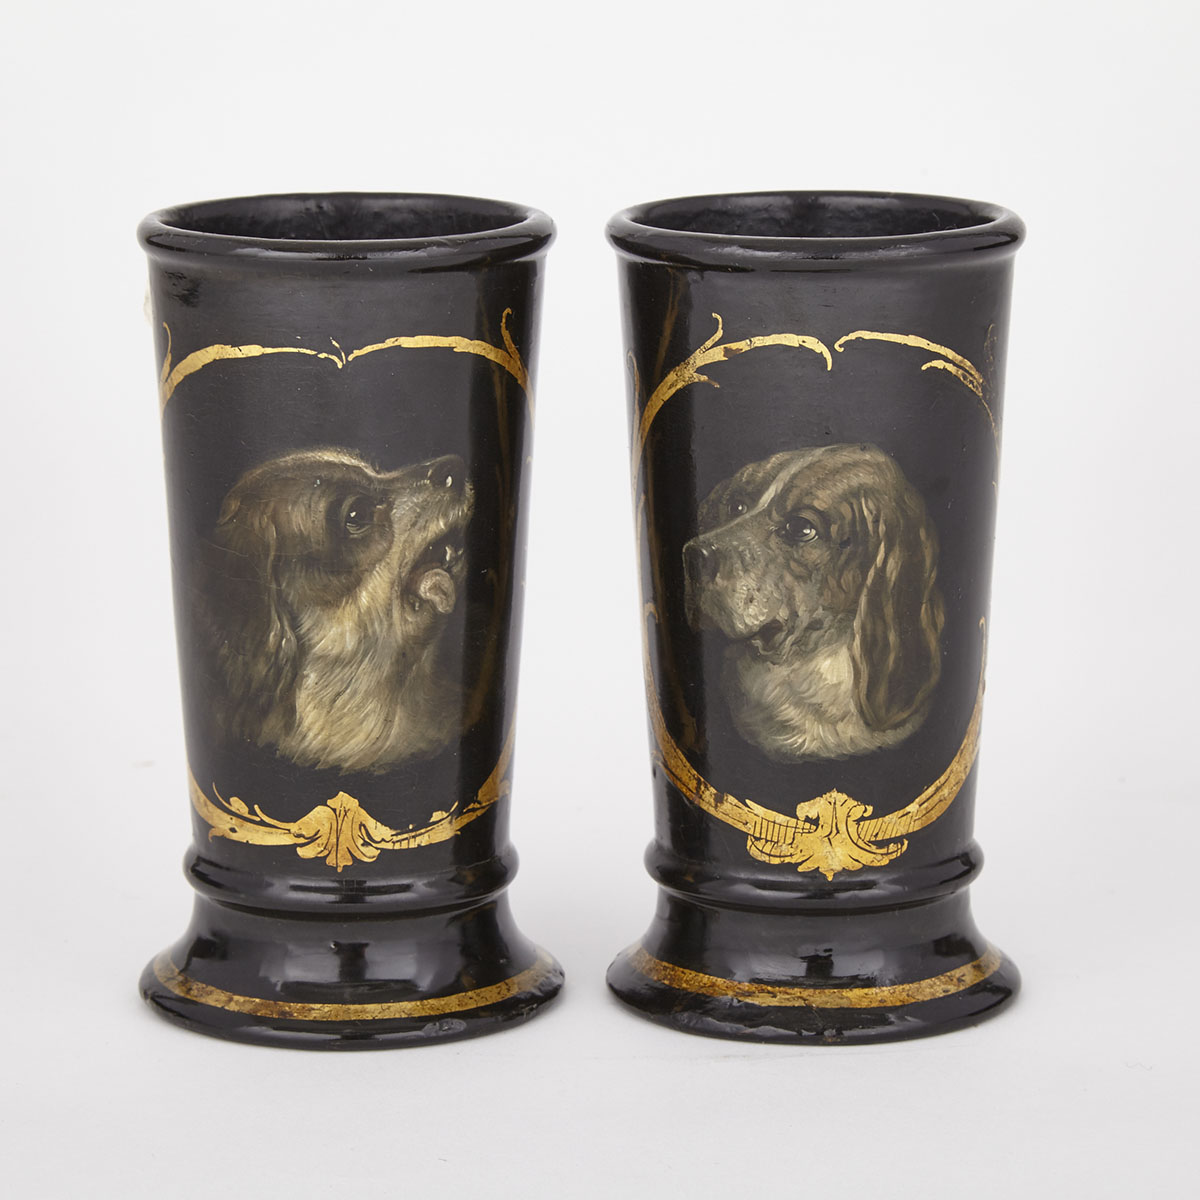 Pair of Victorian Black Lacquered Paint Decorated Papier Maché Spill Vases, mid 19th century